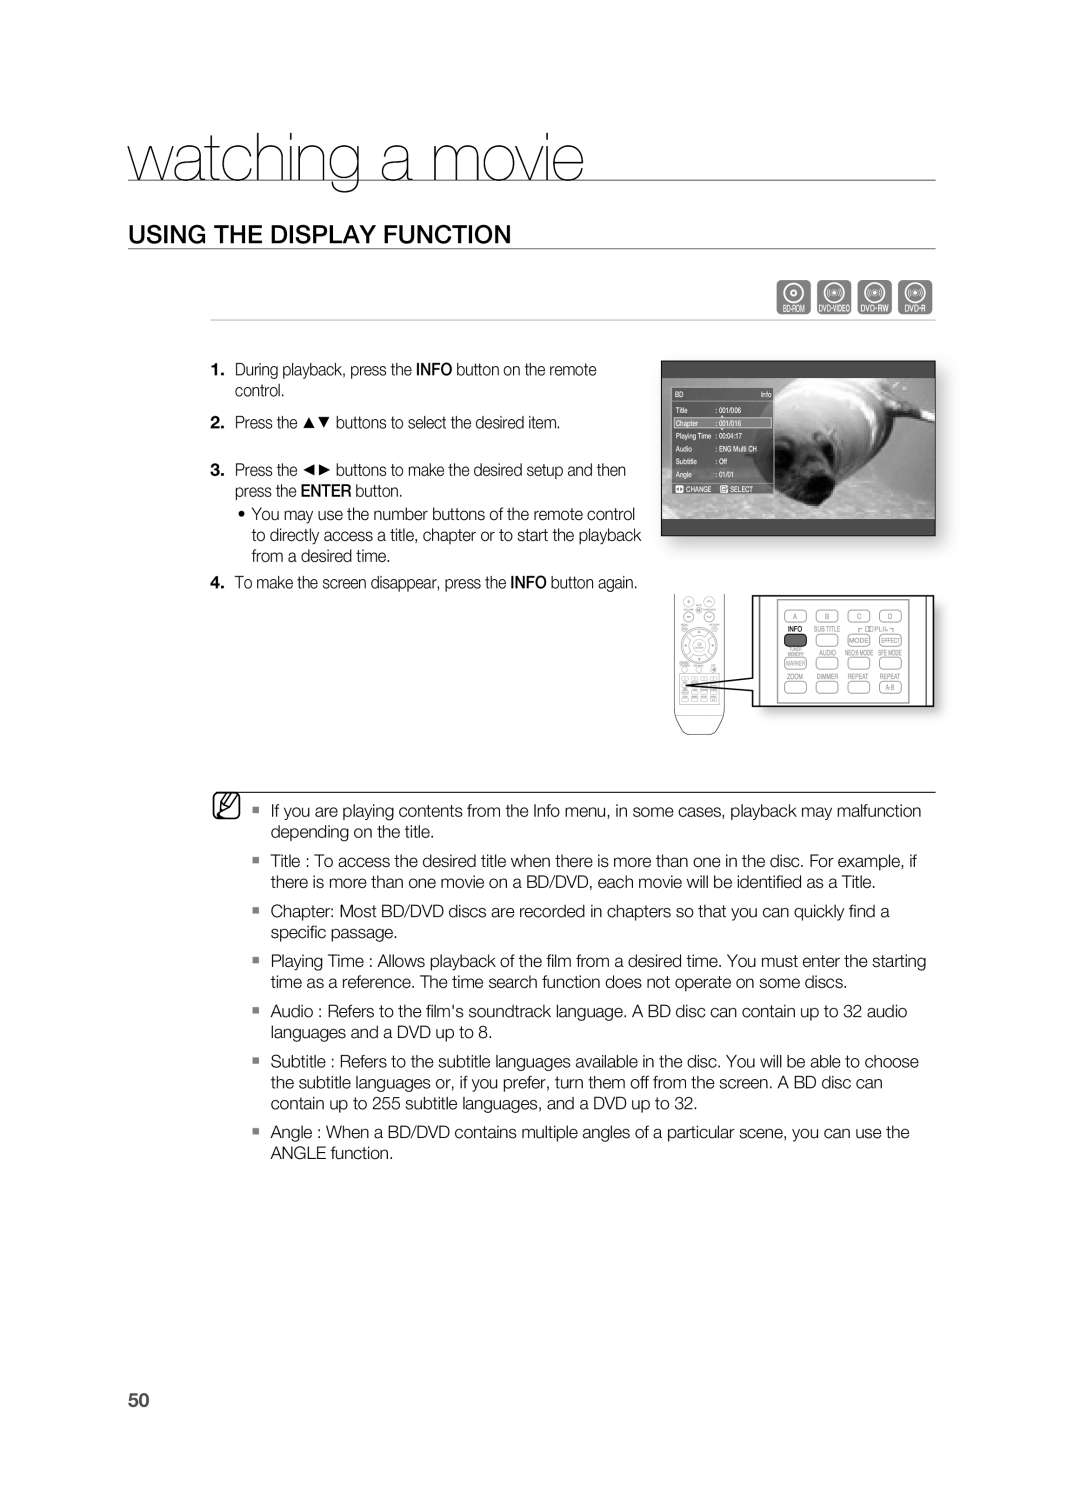 Samsung HT-BD2S manual watching a movie, USIng THE DISPLAY FUnCTIOn, hZCV 